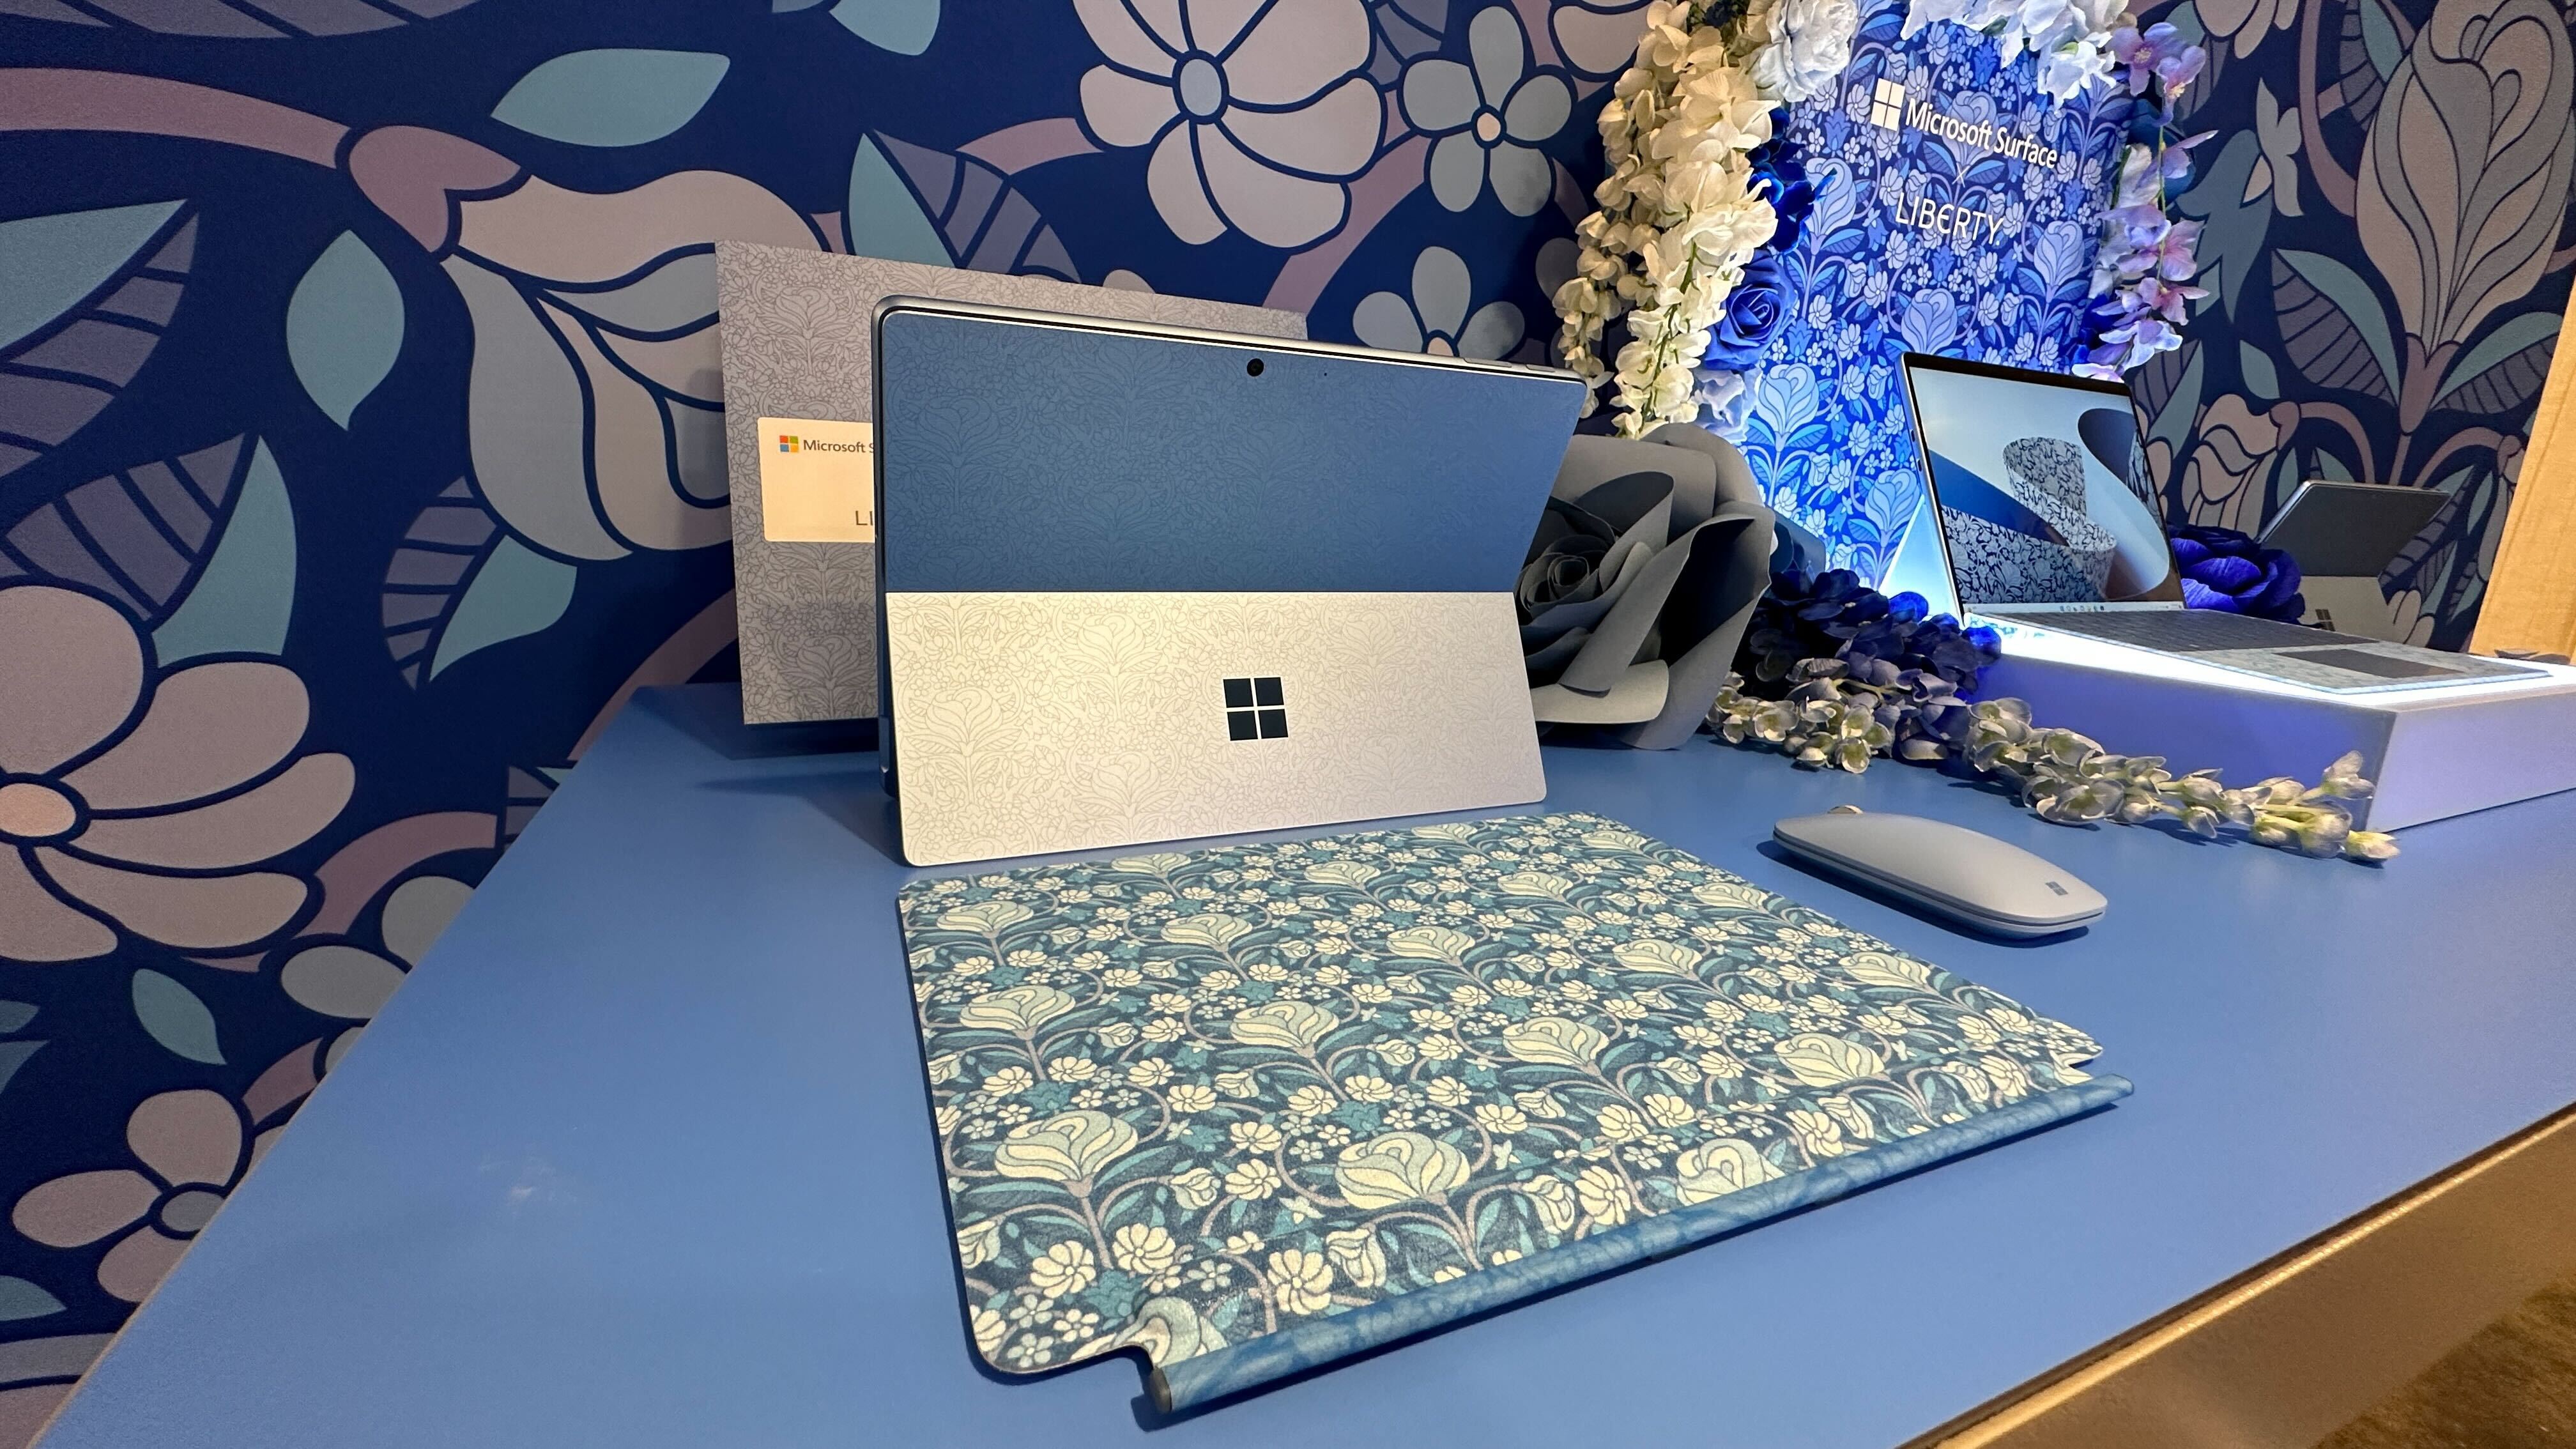 Microsoft Surface X Liberty London collaboration, showing Surface Pro 9 tablet with a blue floral print design.